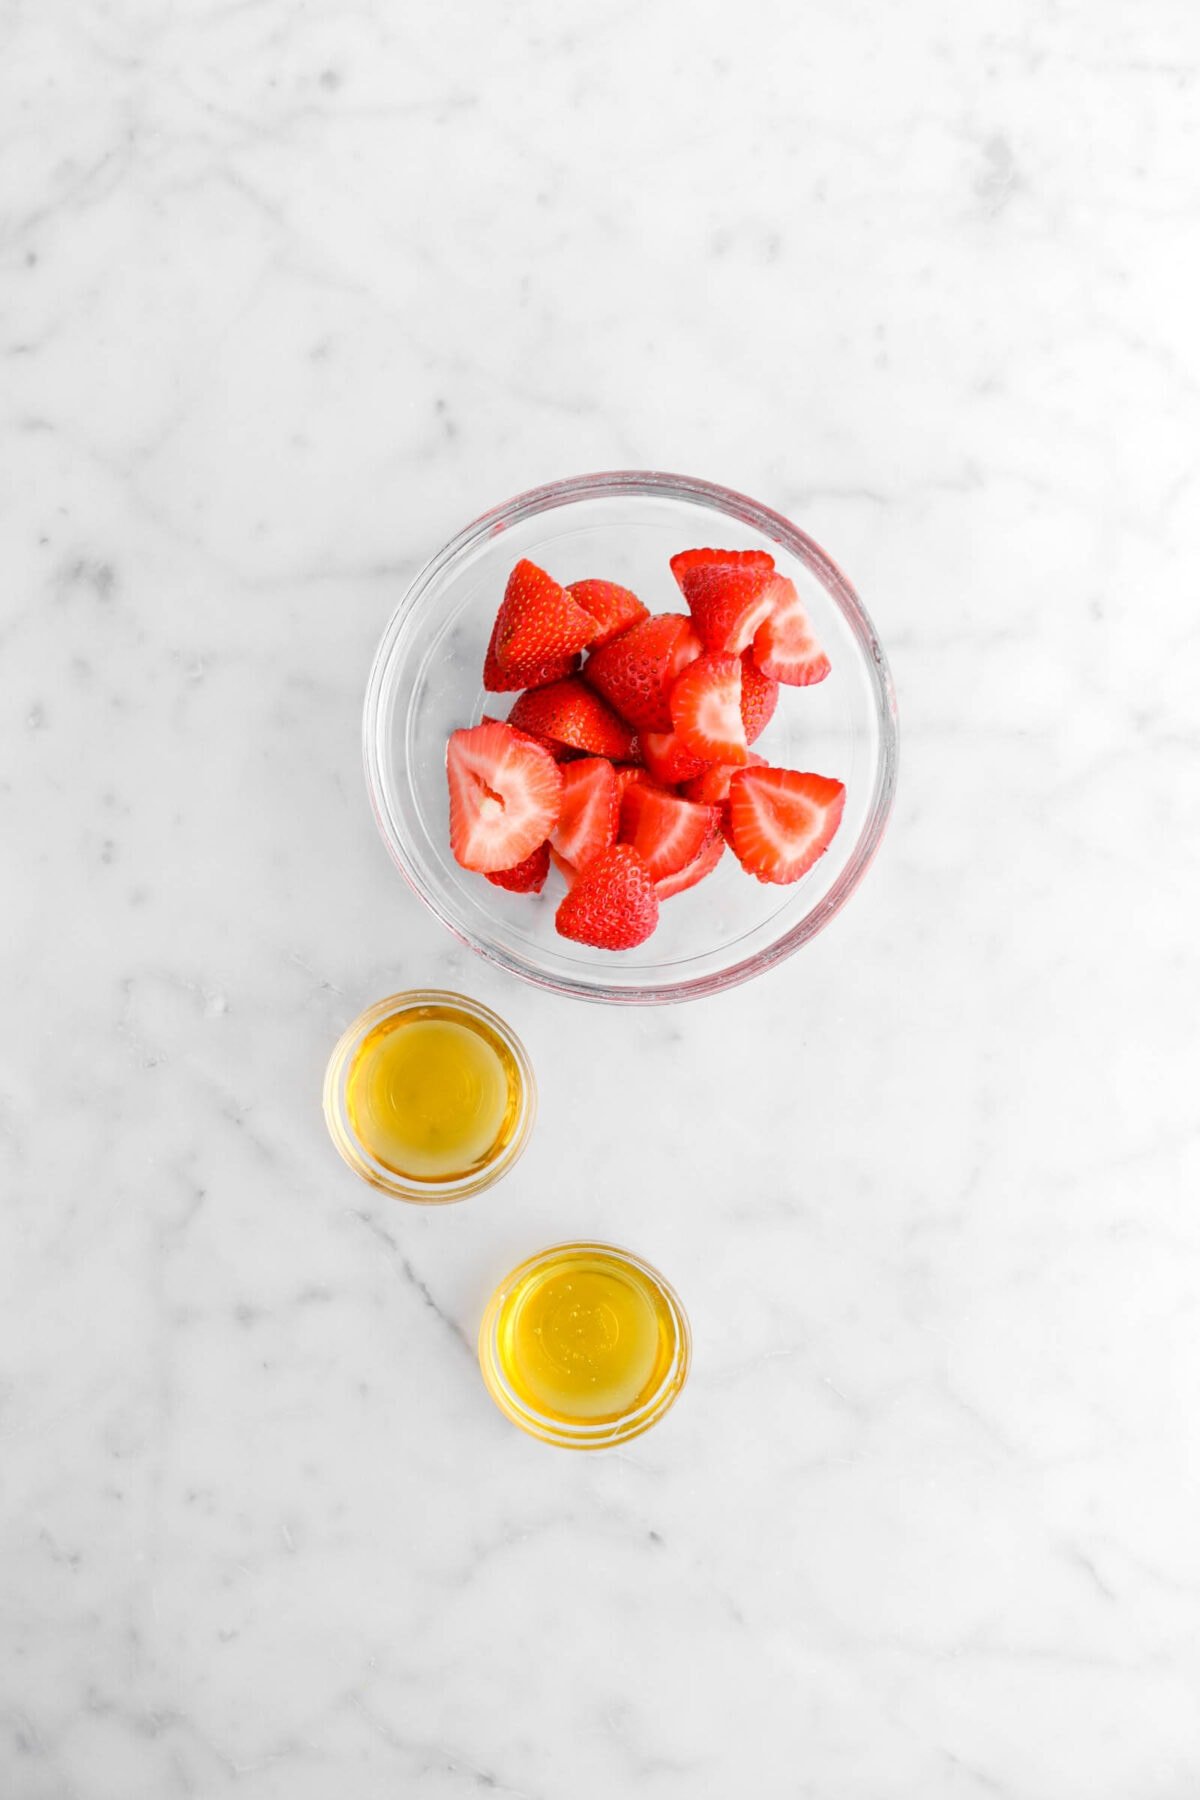 strawberries, honey, and orange liqueur on marble surface.